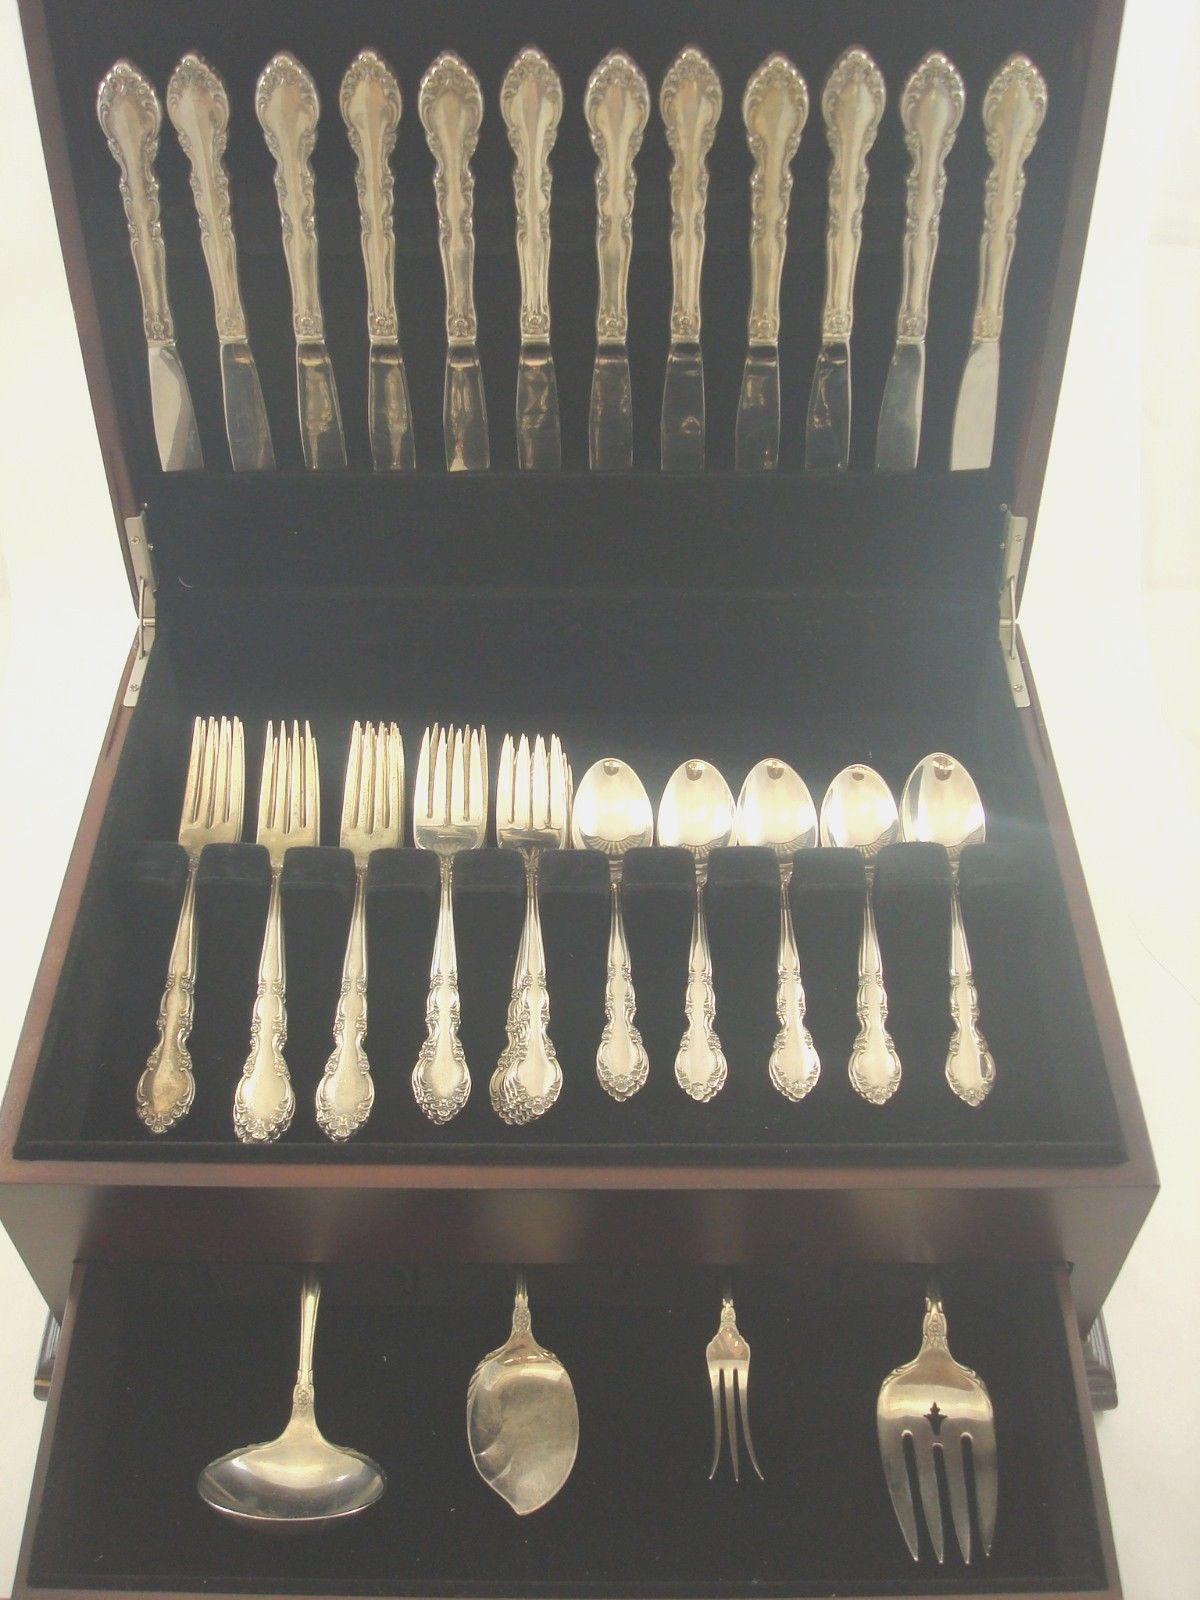 Outstanding Grandeur by Oneida sterling silver flatware set - 52 pieces. This set includes:

12 knives, 9